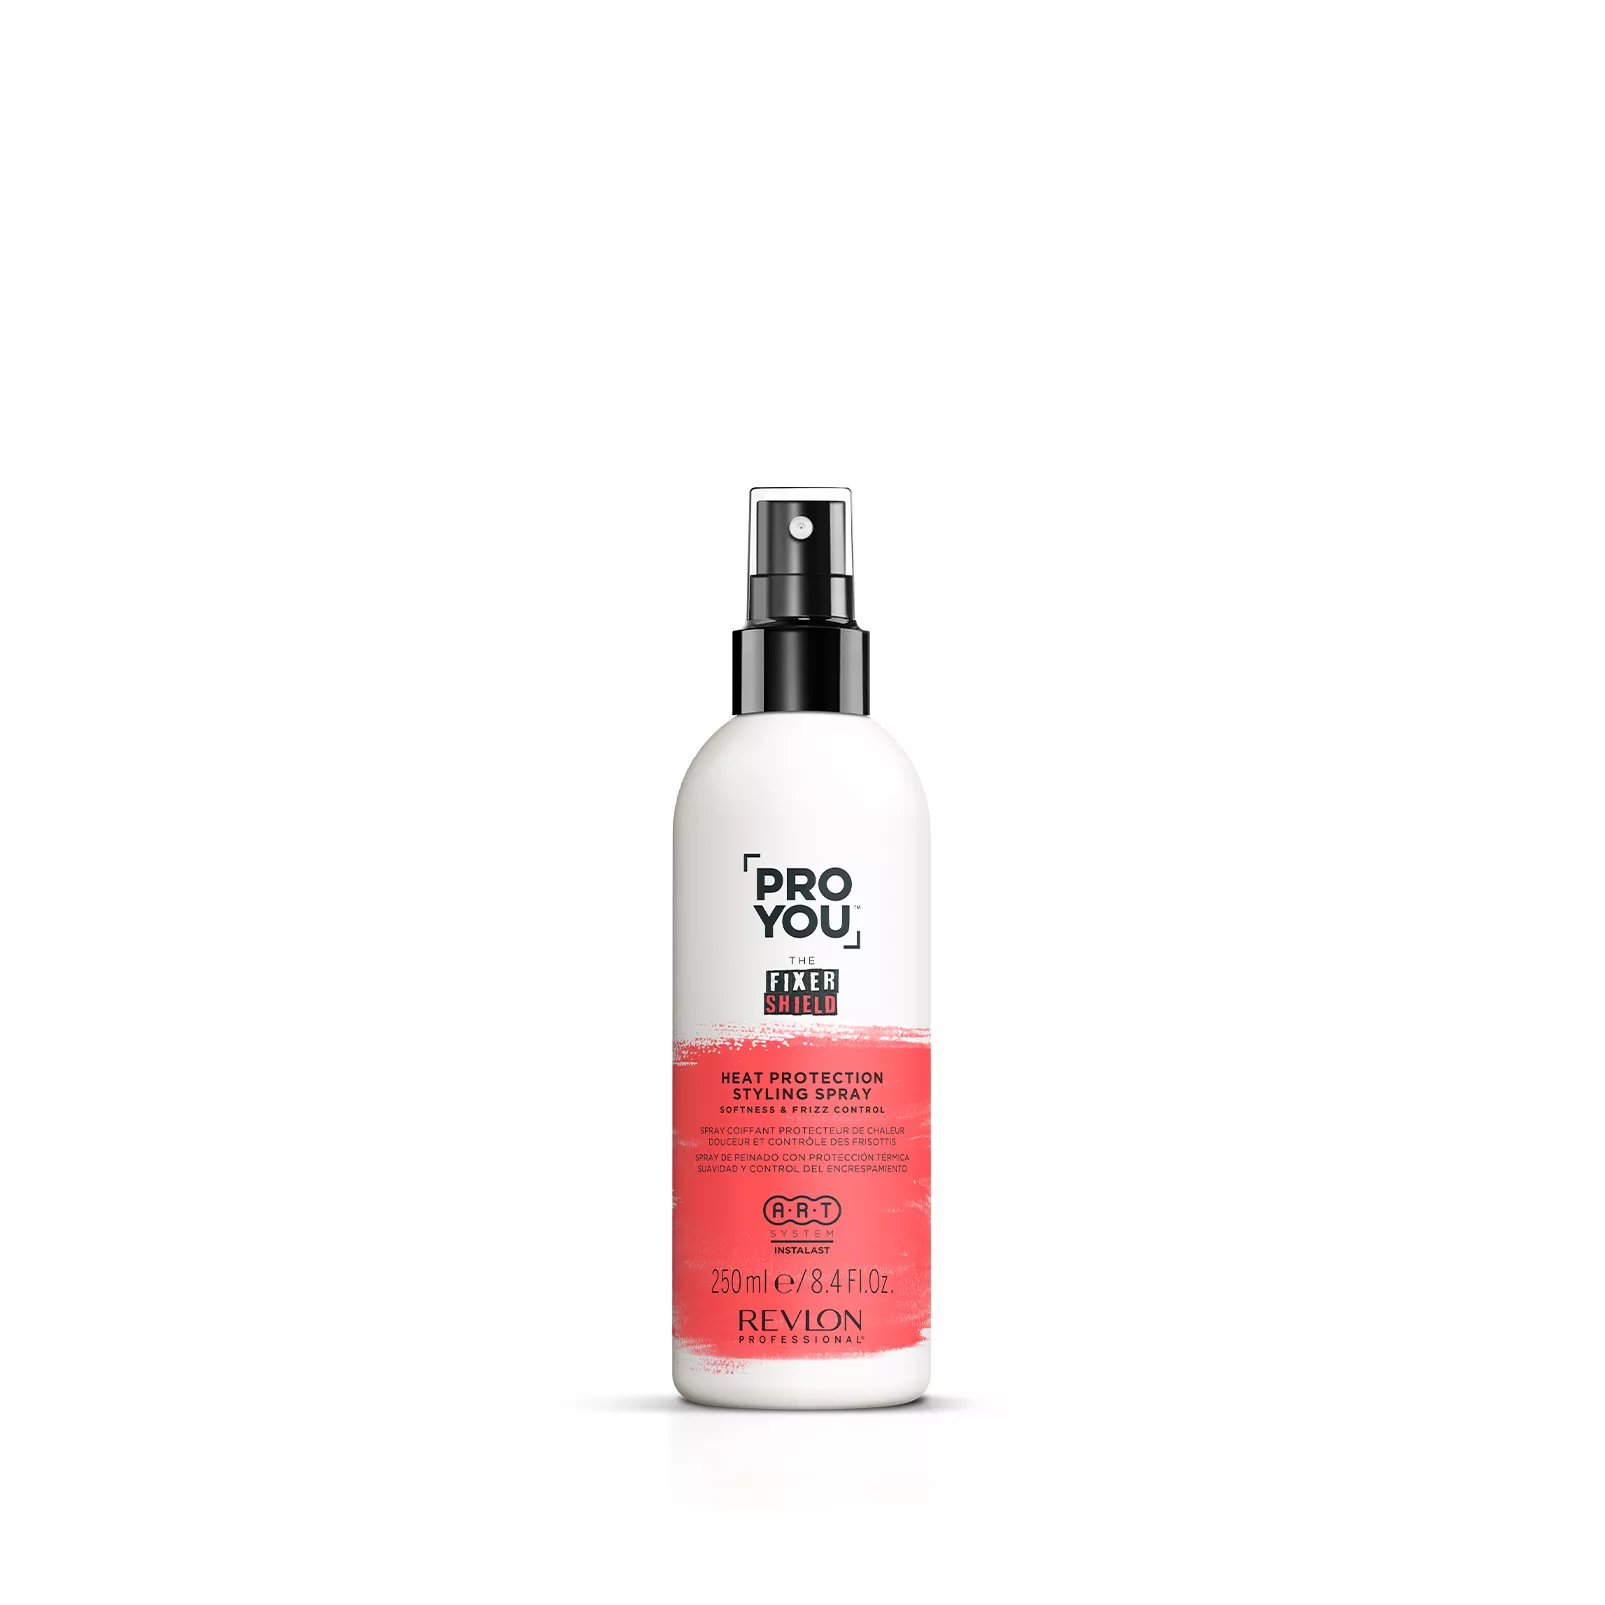 Pro You™ The Fixer Shield Revlon - Heat Protection Professional Spray & Styling